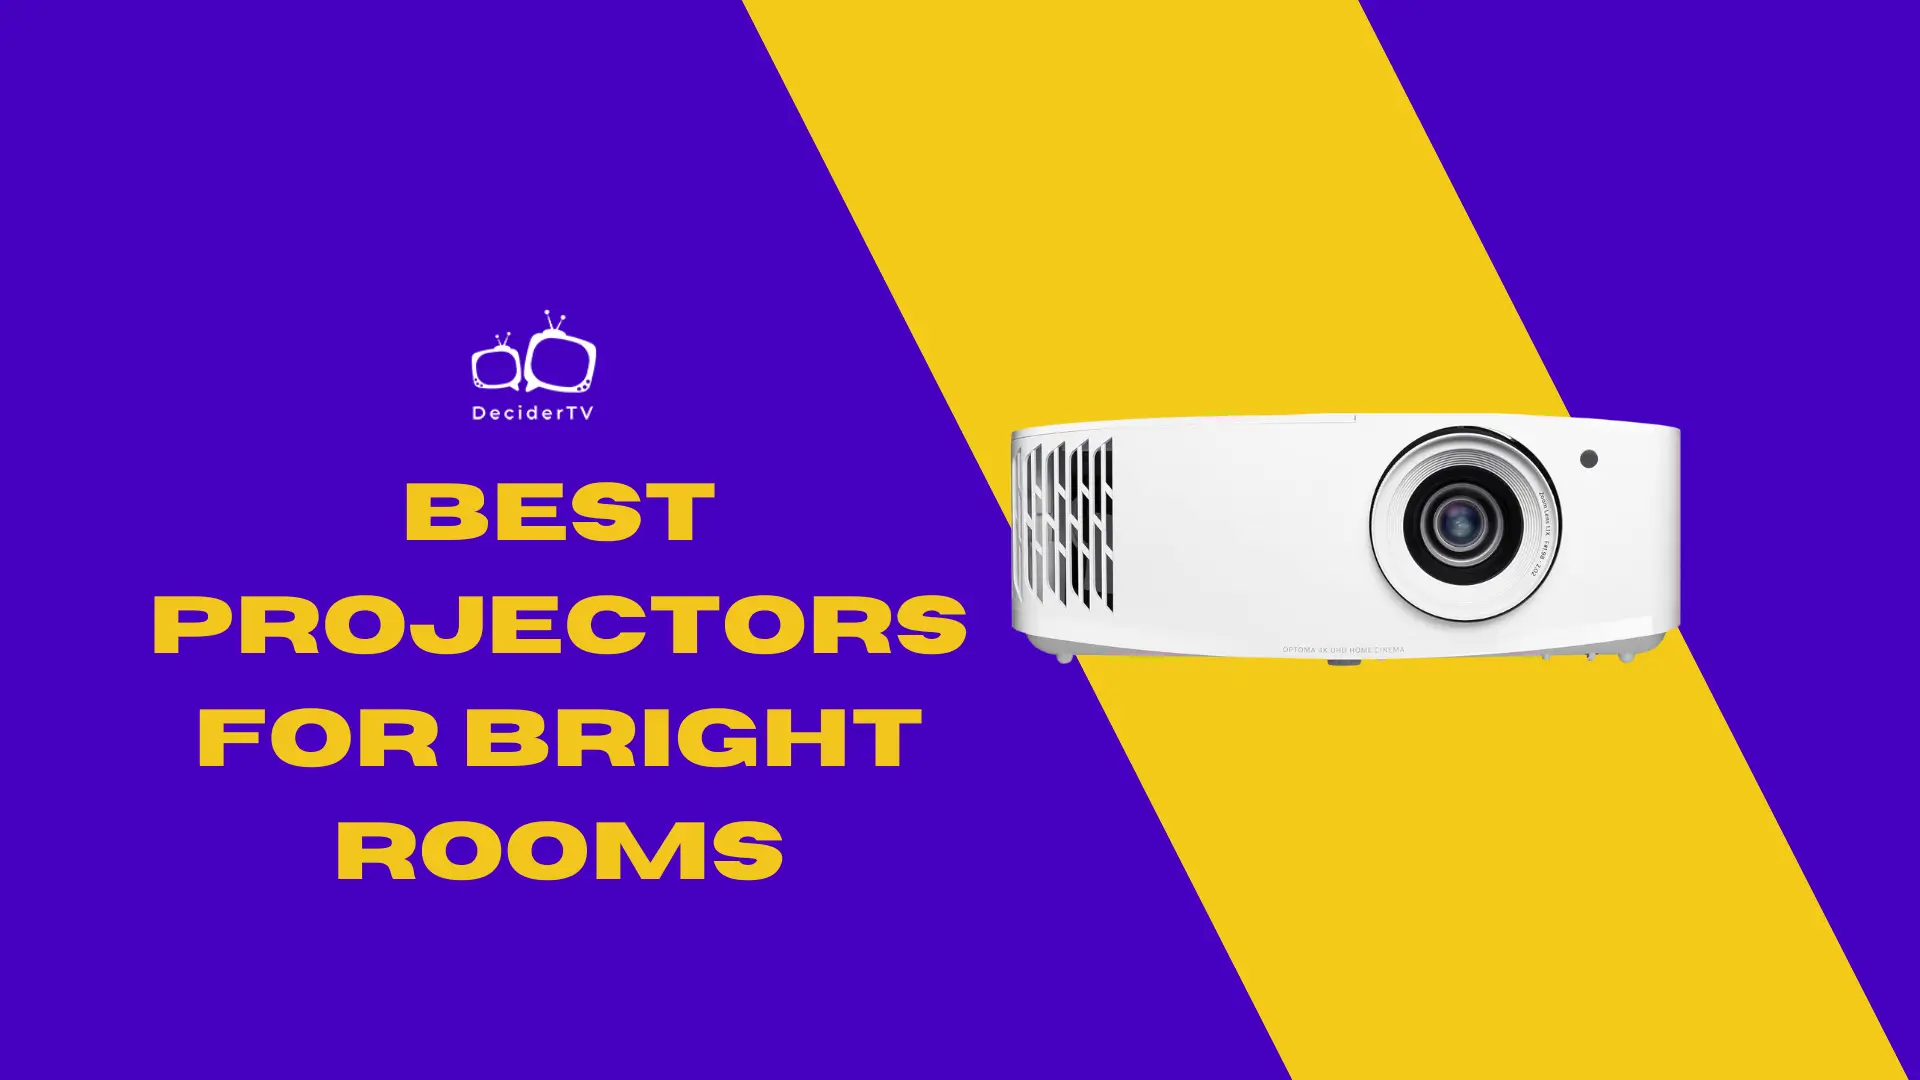 Best Projectors for Bright Rooms